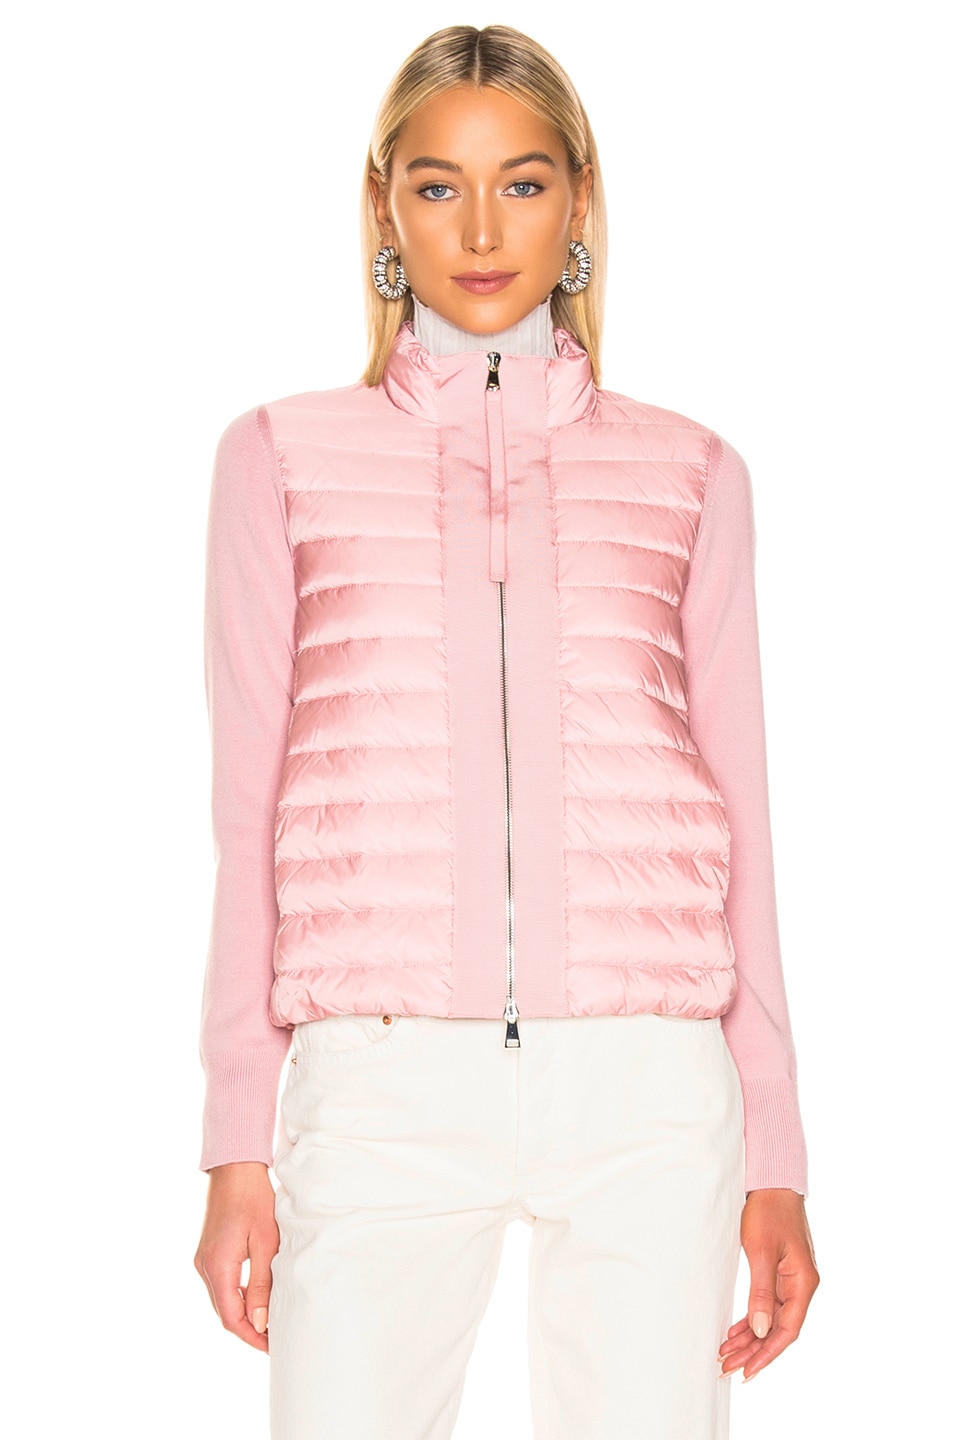 Moncler Maglia Tricot Cardigan Jacket in Pink | FWRD